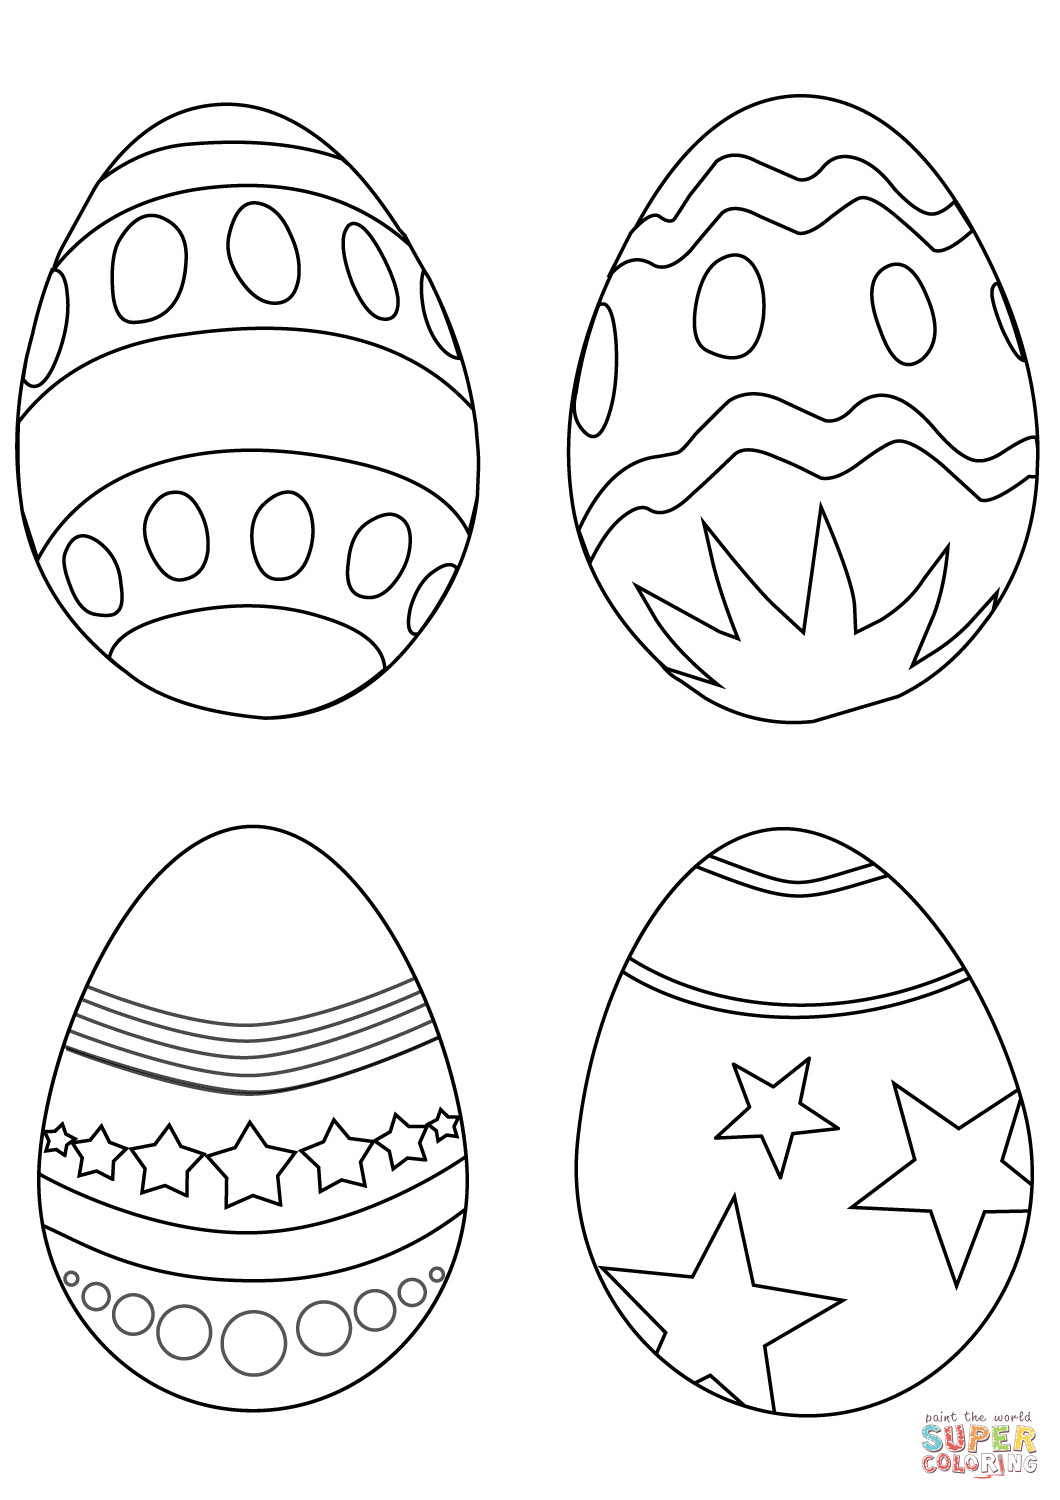 Free Printable Easter Egg Coloring Pages
 Egg Line Drawing at GetDrawings